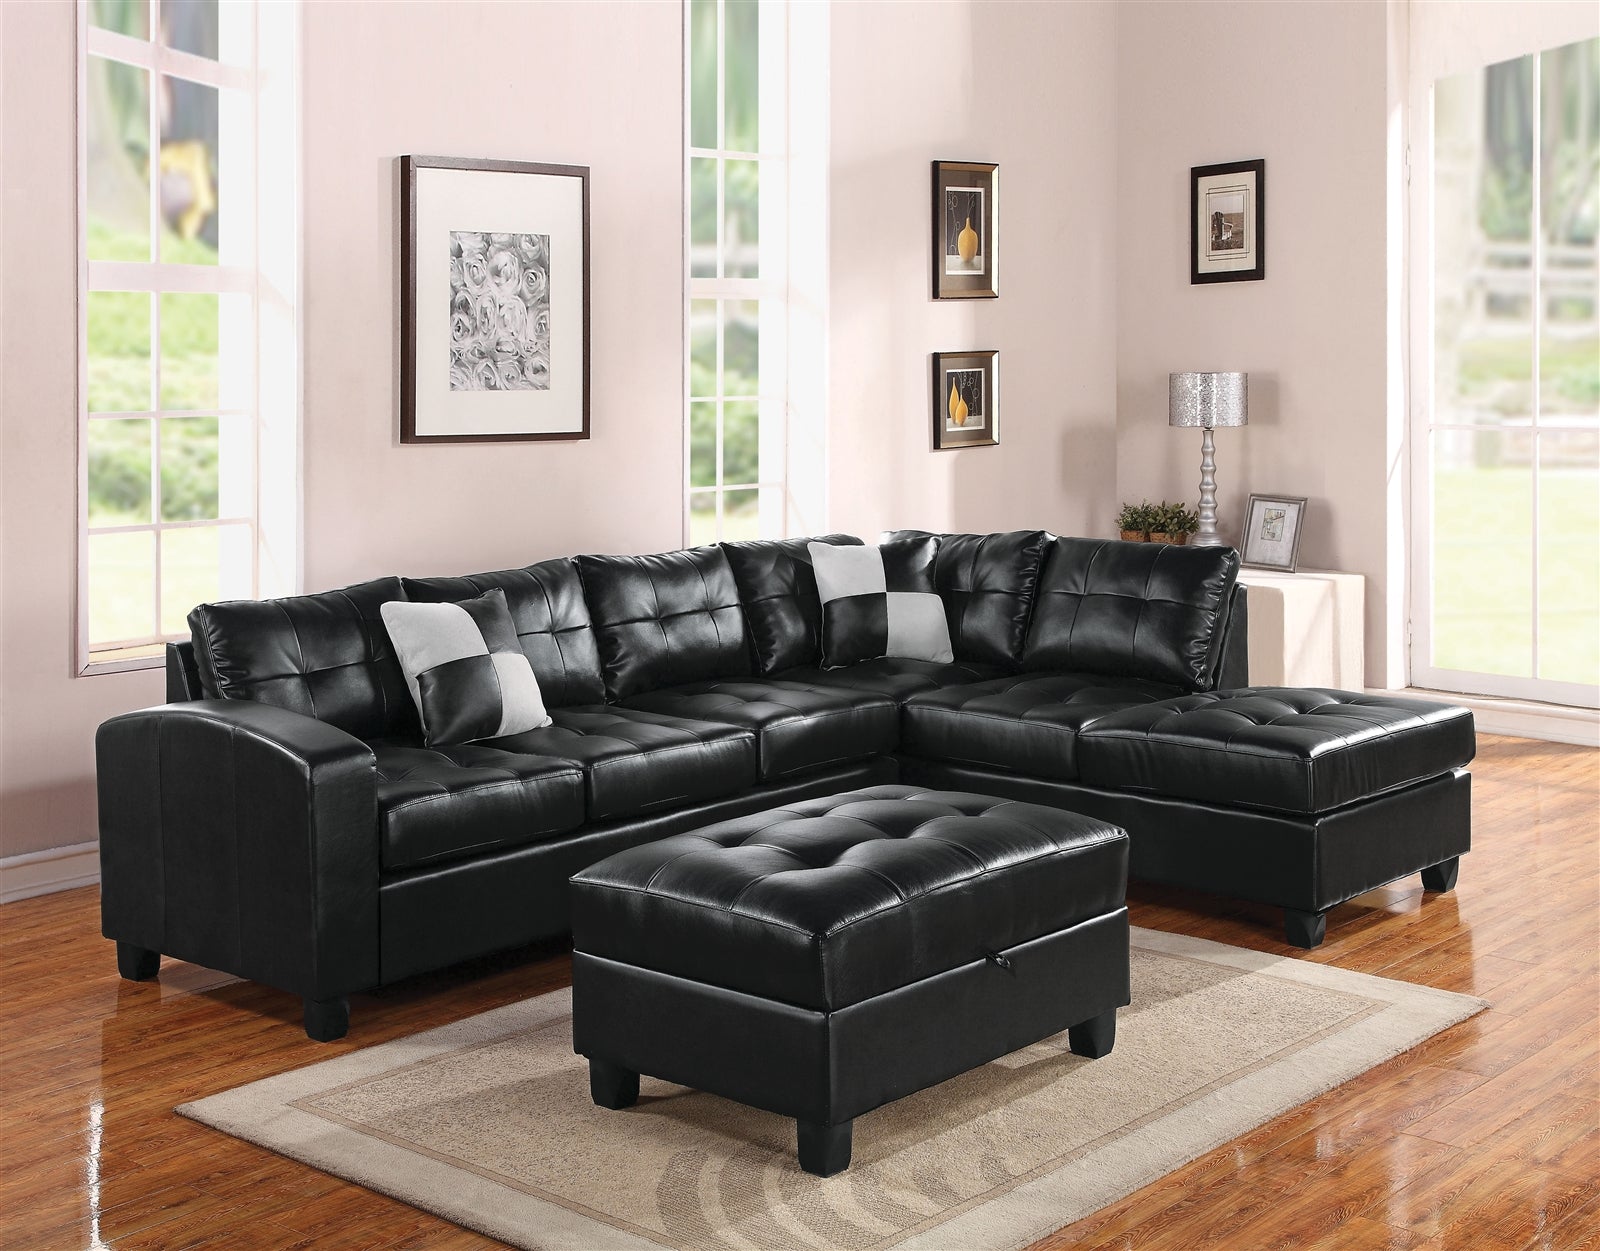 Kiva Contemporary Black Leather Sectional - ACME